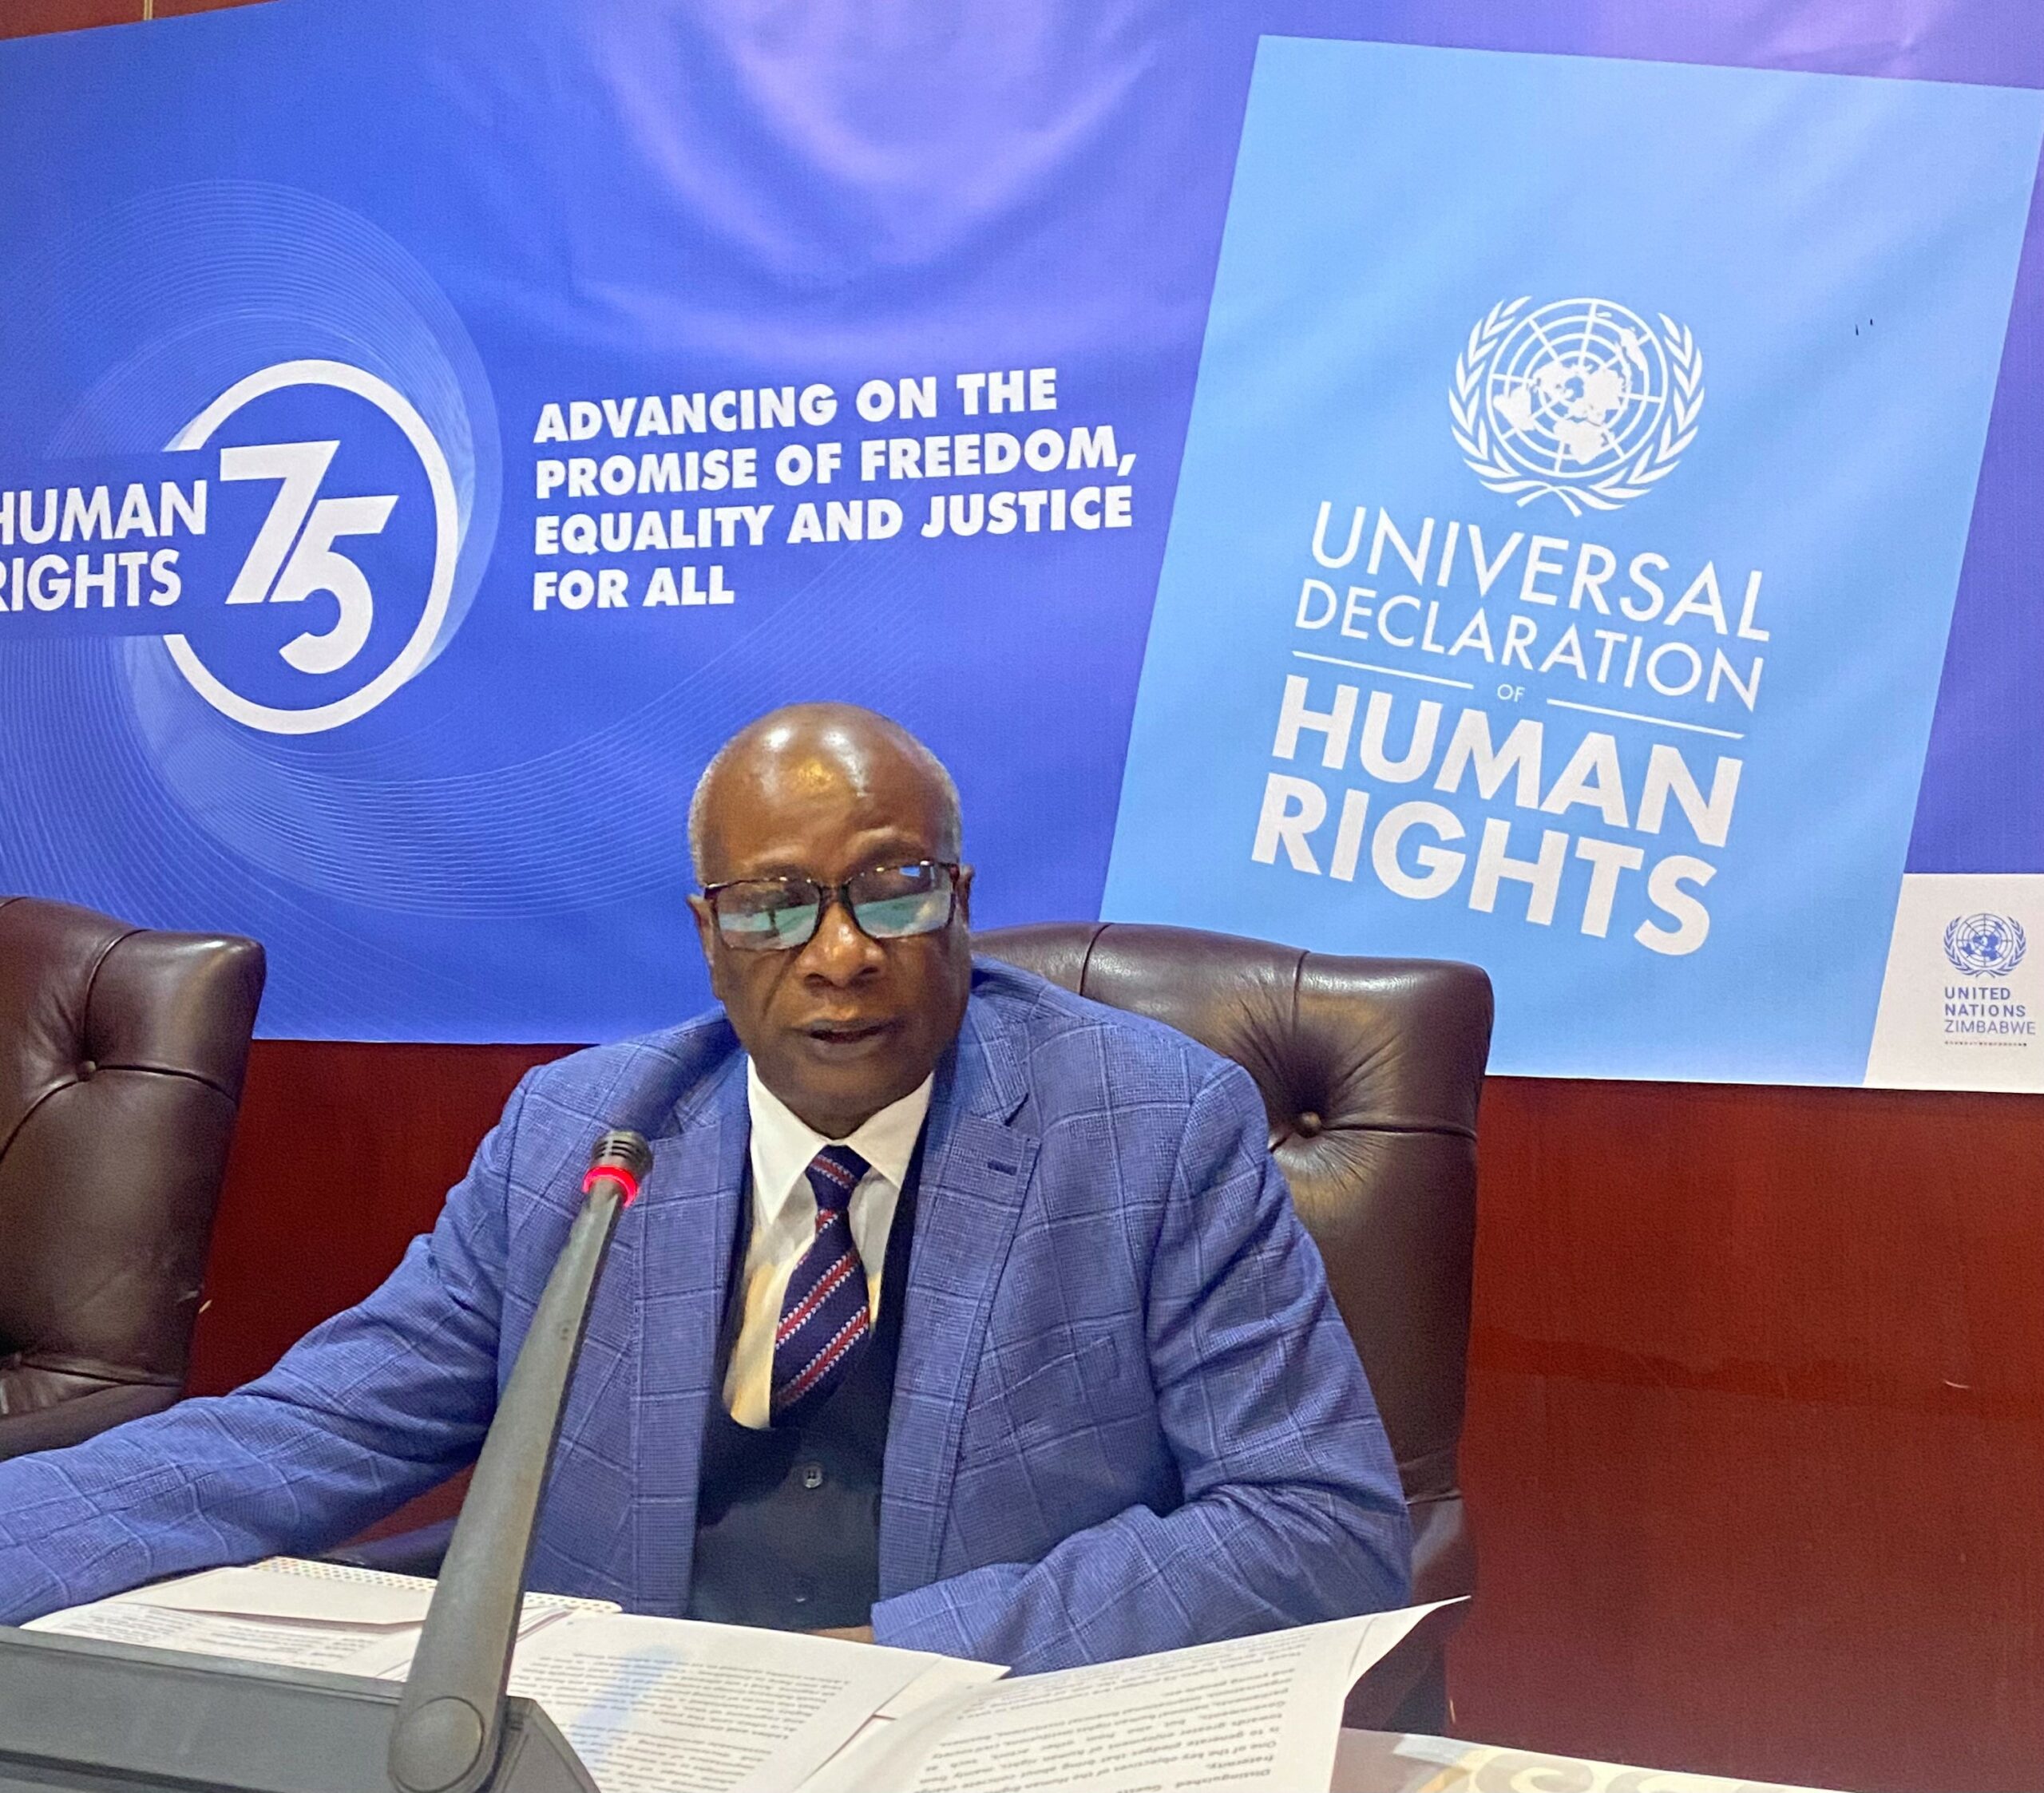 Human Rights 75 Initiative: UN focuses on equality for all